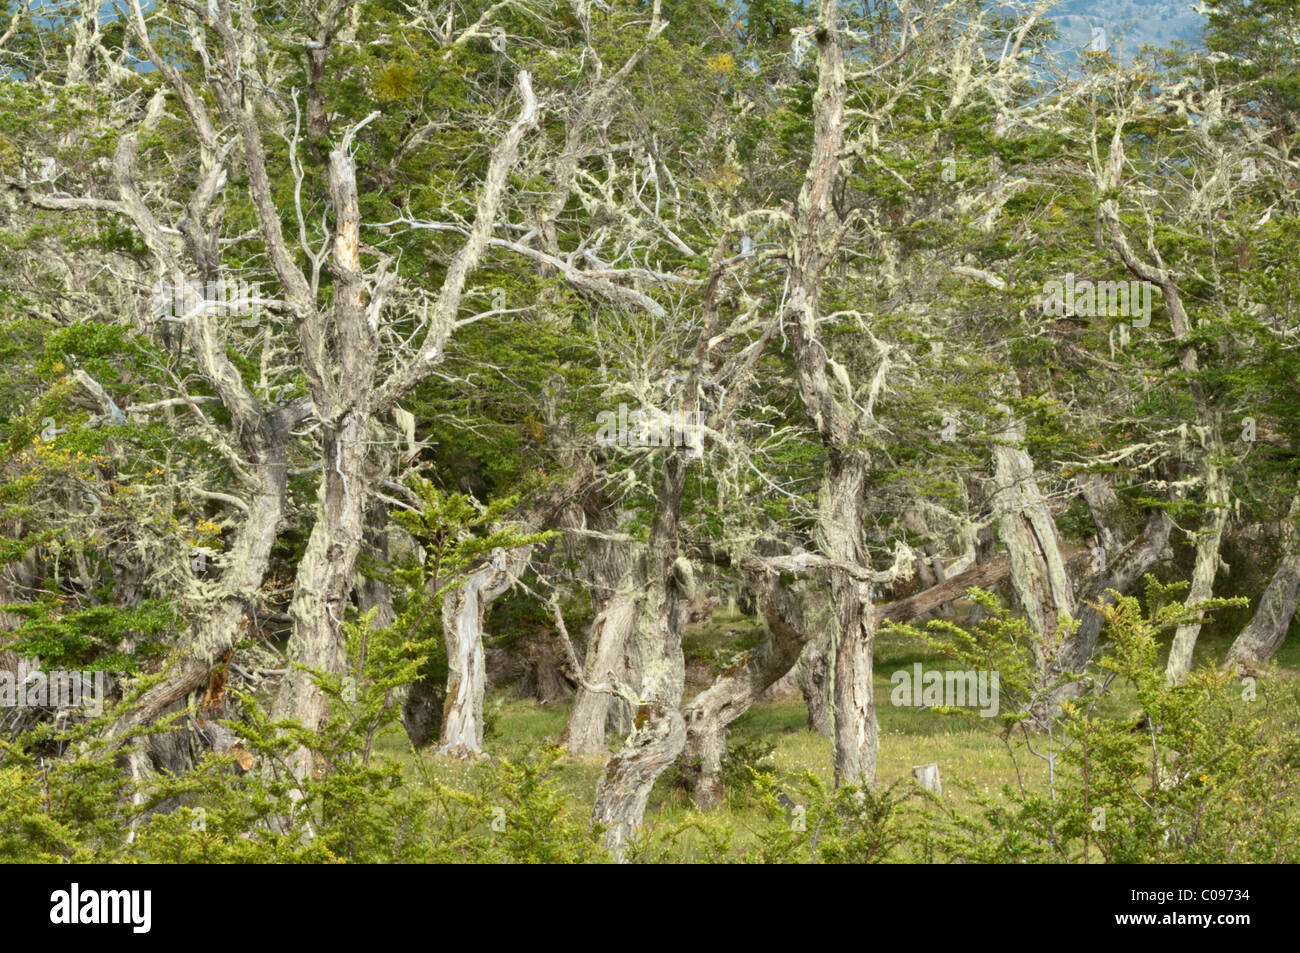 Southern beech (Nothofagus) wood the Torres del Paine National Park Patagonia, Chile South America Stock Photo